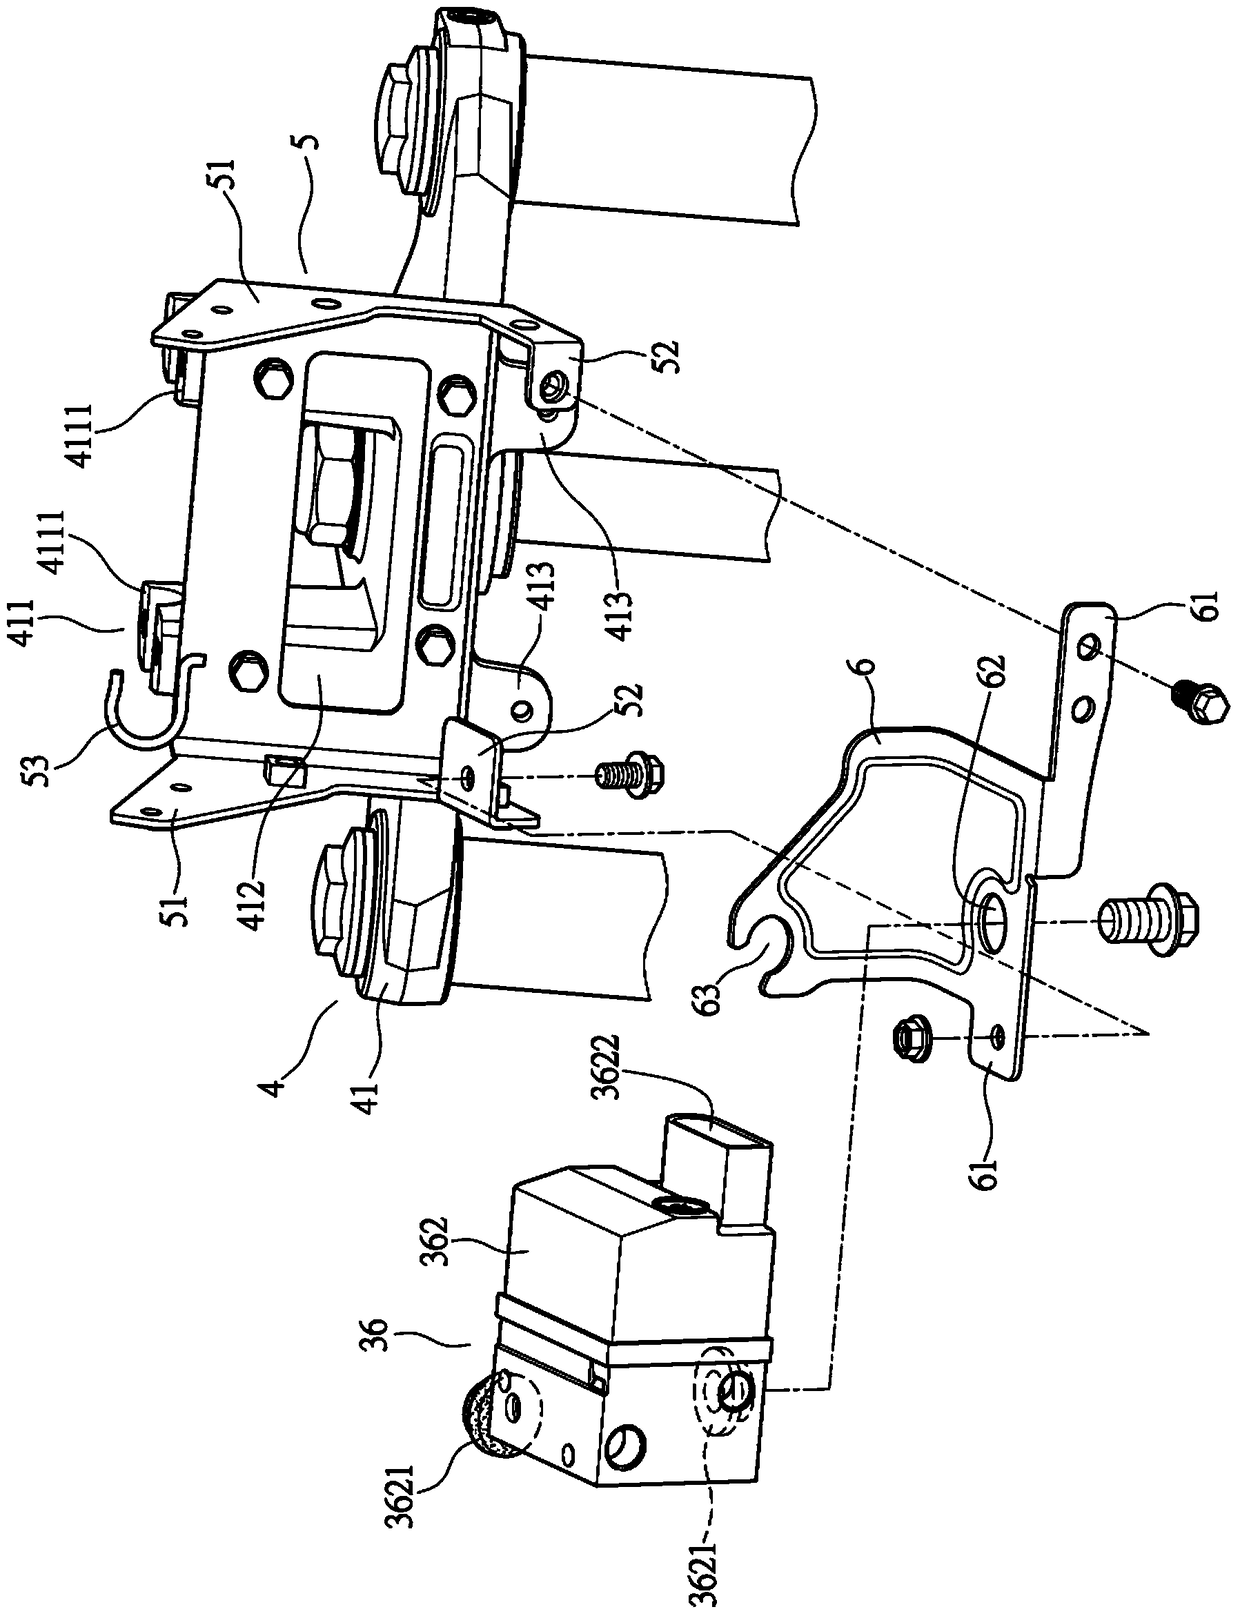 Control Unit Structure of Motorcycle Anti-skid Braking System